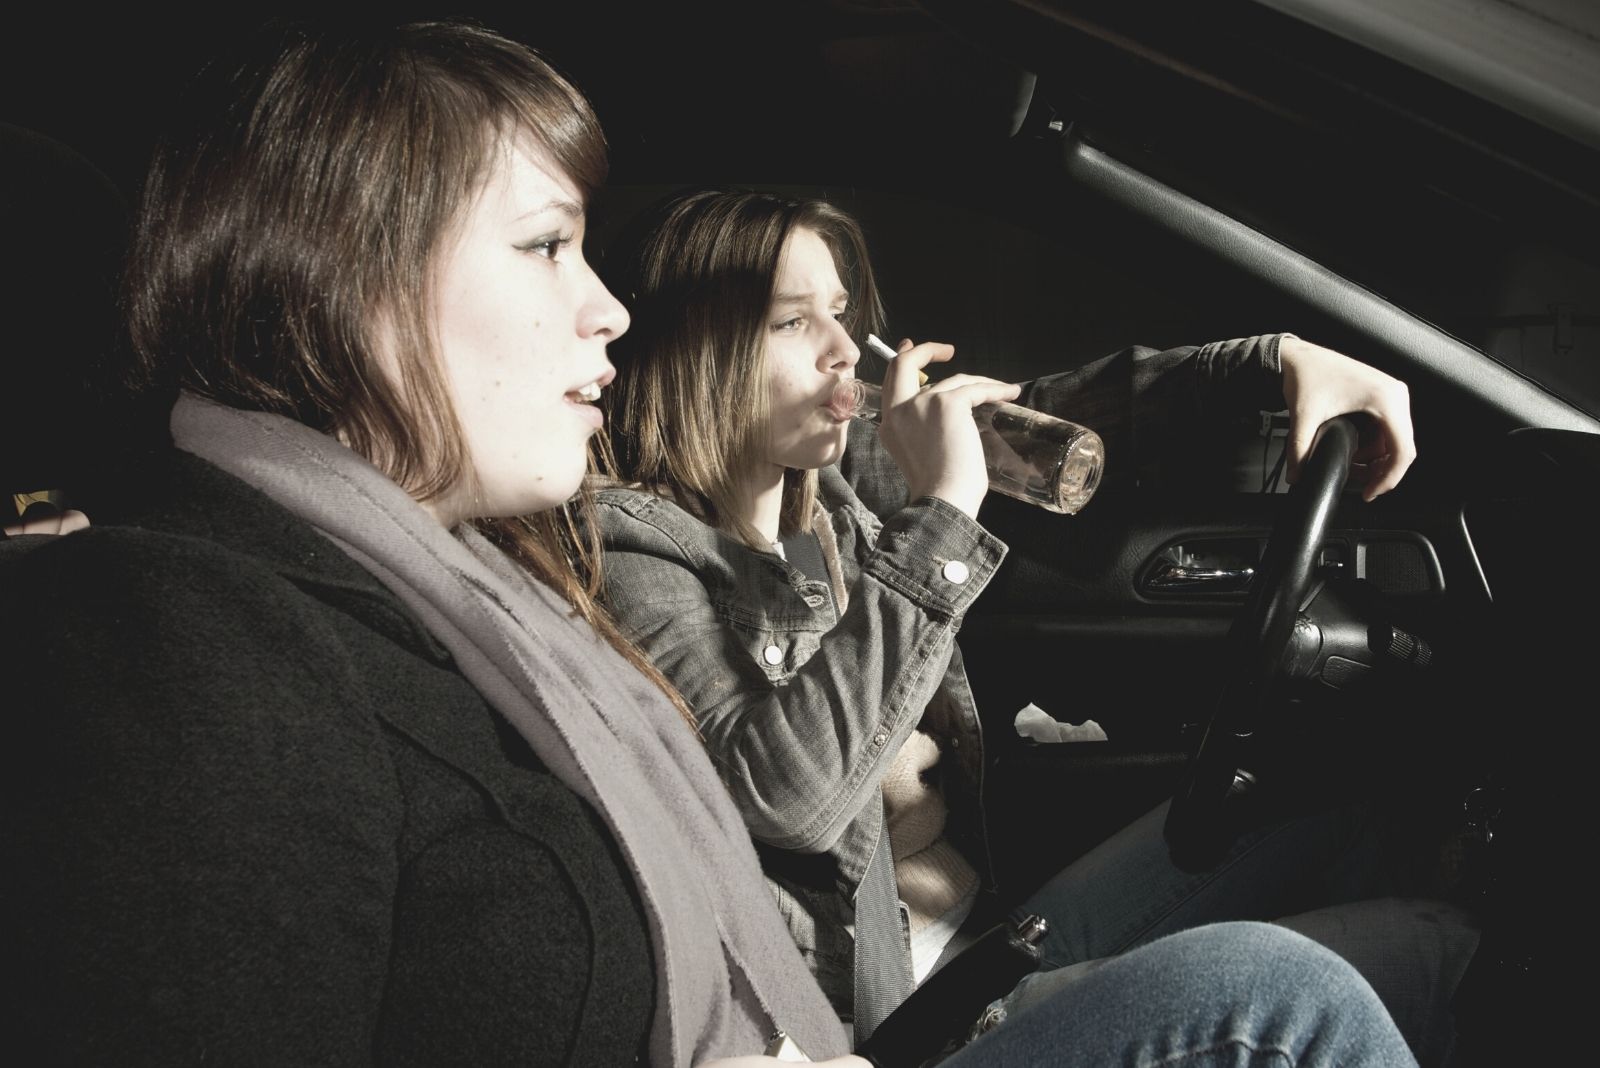 two women inside the car drinking while driving